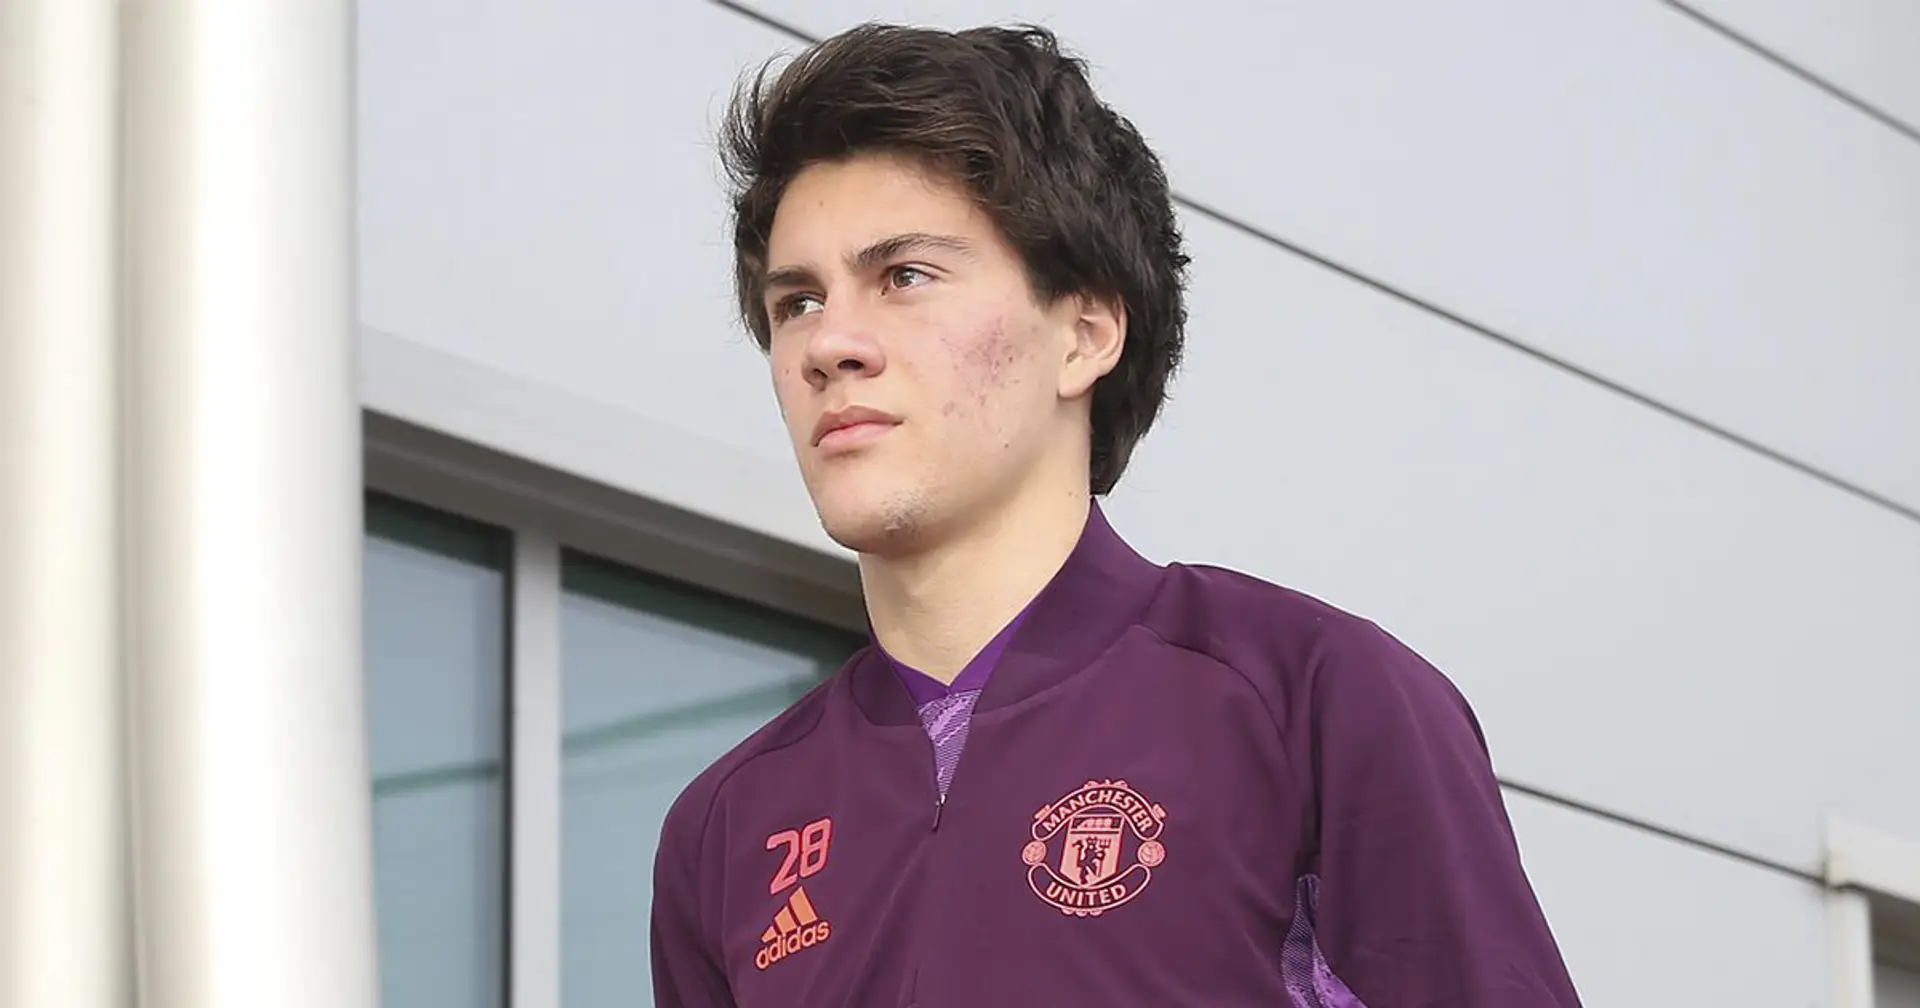 Pellistri set to play his first United game as part of reserve squad – just like Vidic and Evra did